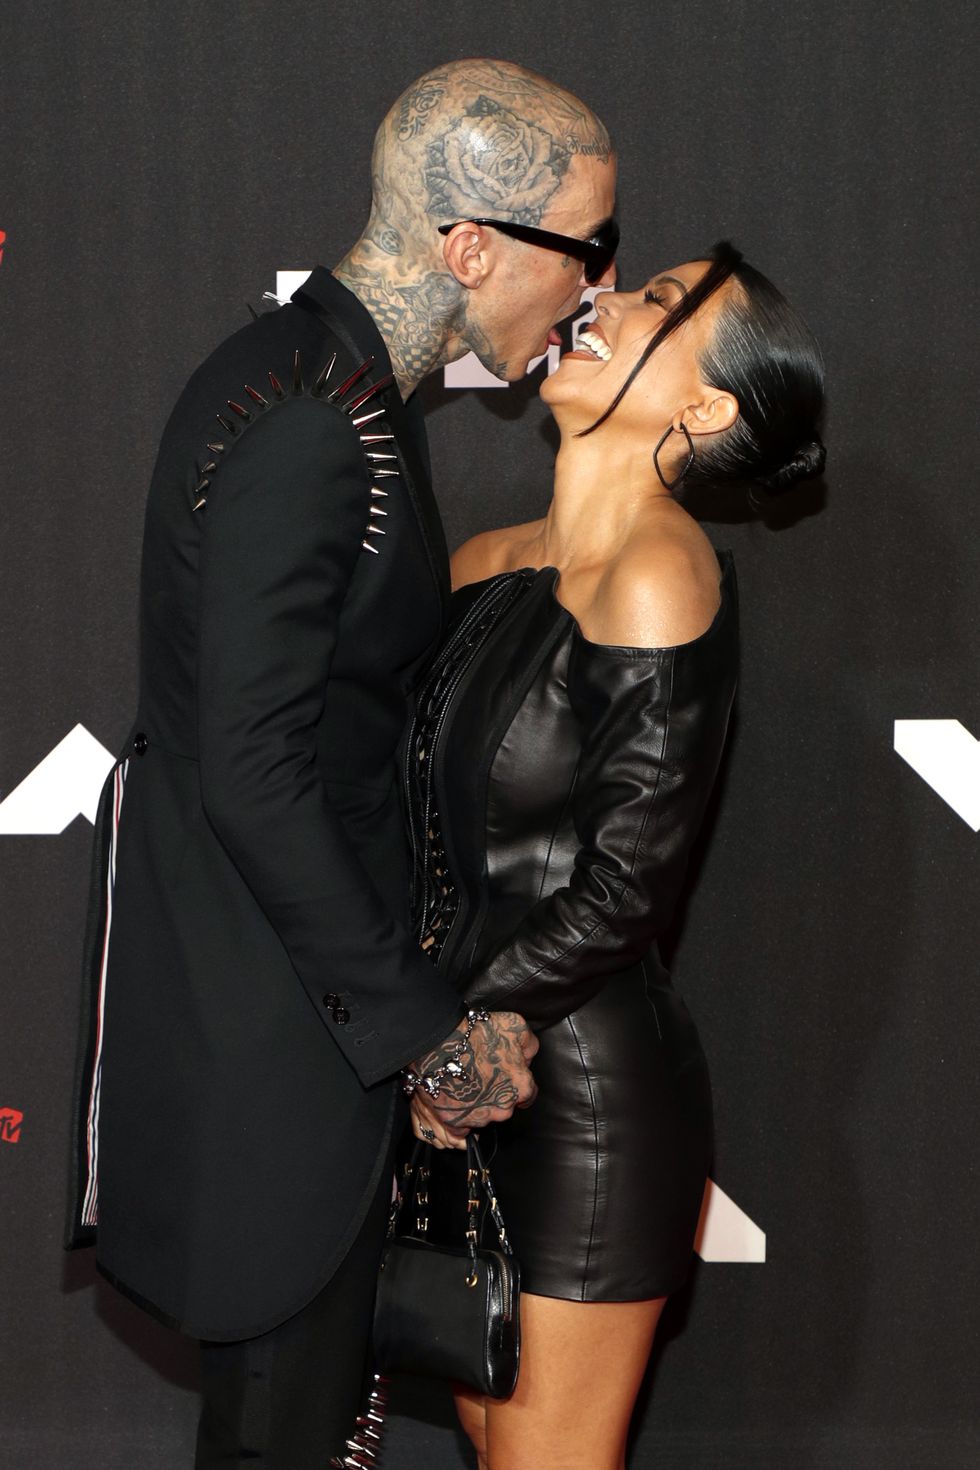 new york, new york   september 12 l r travis barker and kourtney kardashian attend the 2021 mtv video music awards at barclays center on september 12, 2021 in the brooklyn borough of new york city photo by astrid stawiarzwireimage